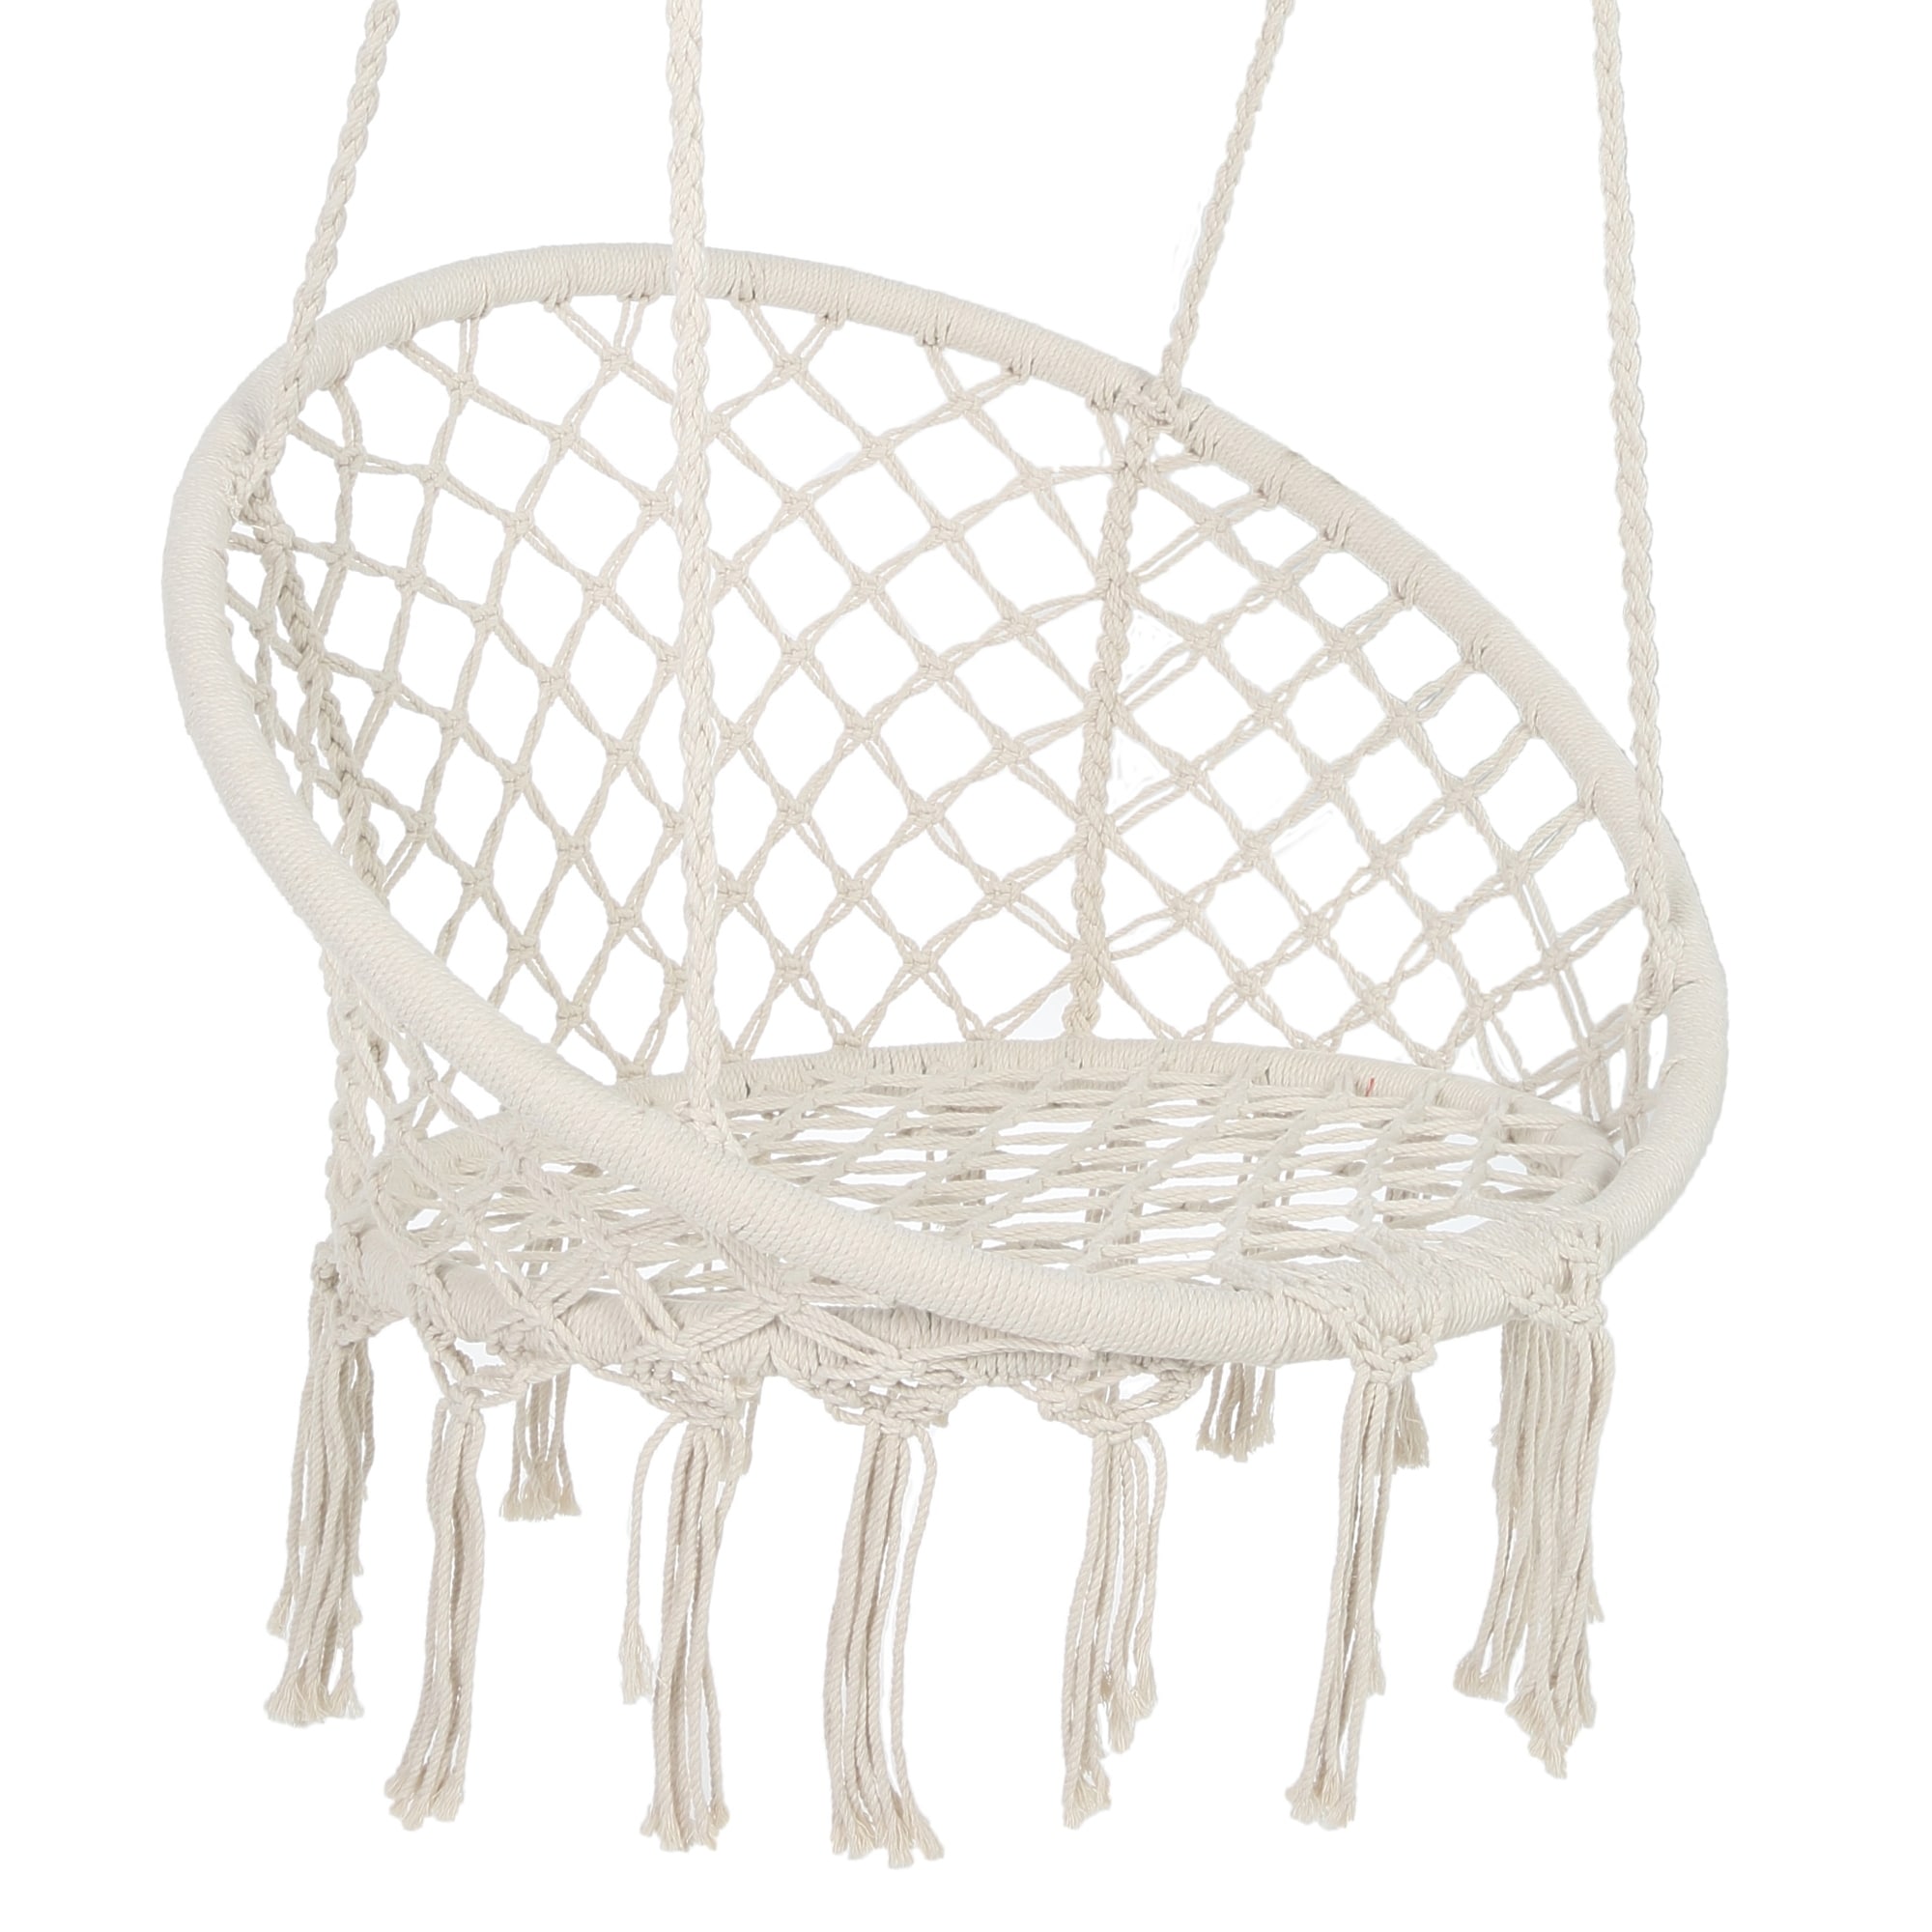 Handmade Knitted Hanging Cotton Rope Chair for Indoor/Outdoor Home Patio Deck Yard Garden Reading Leisure Beige KINGSO Hammock Chair Macrame Swing 325 Pounds Capacity 